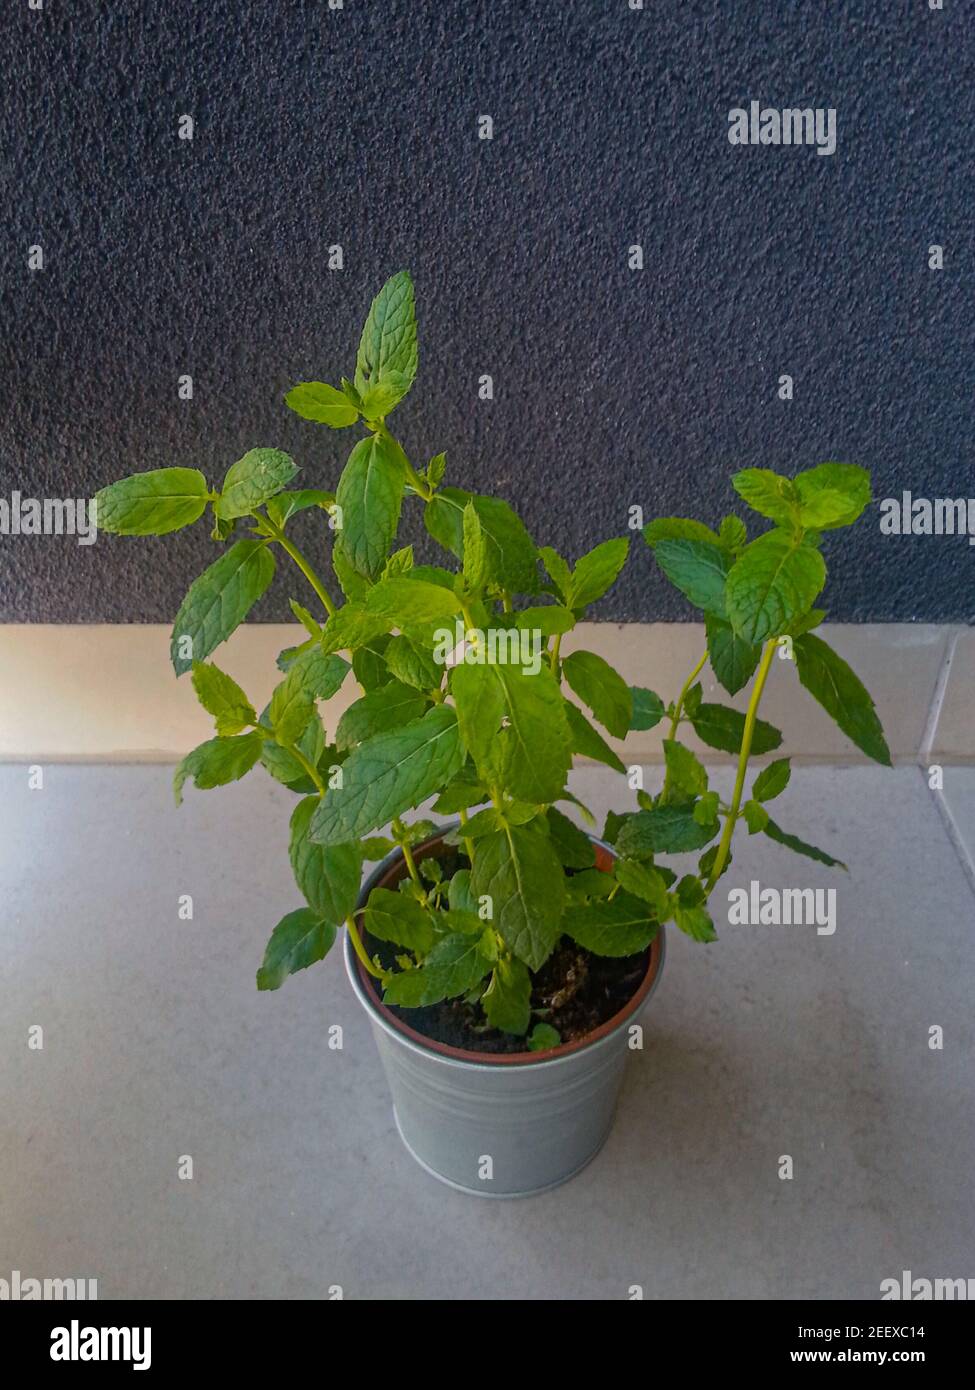 Mint plant planted in metal flowerpot at balcony Stock Photo